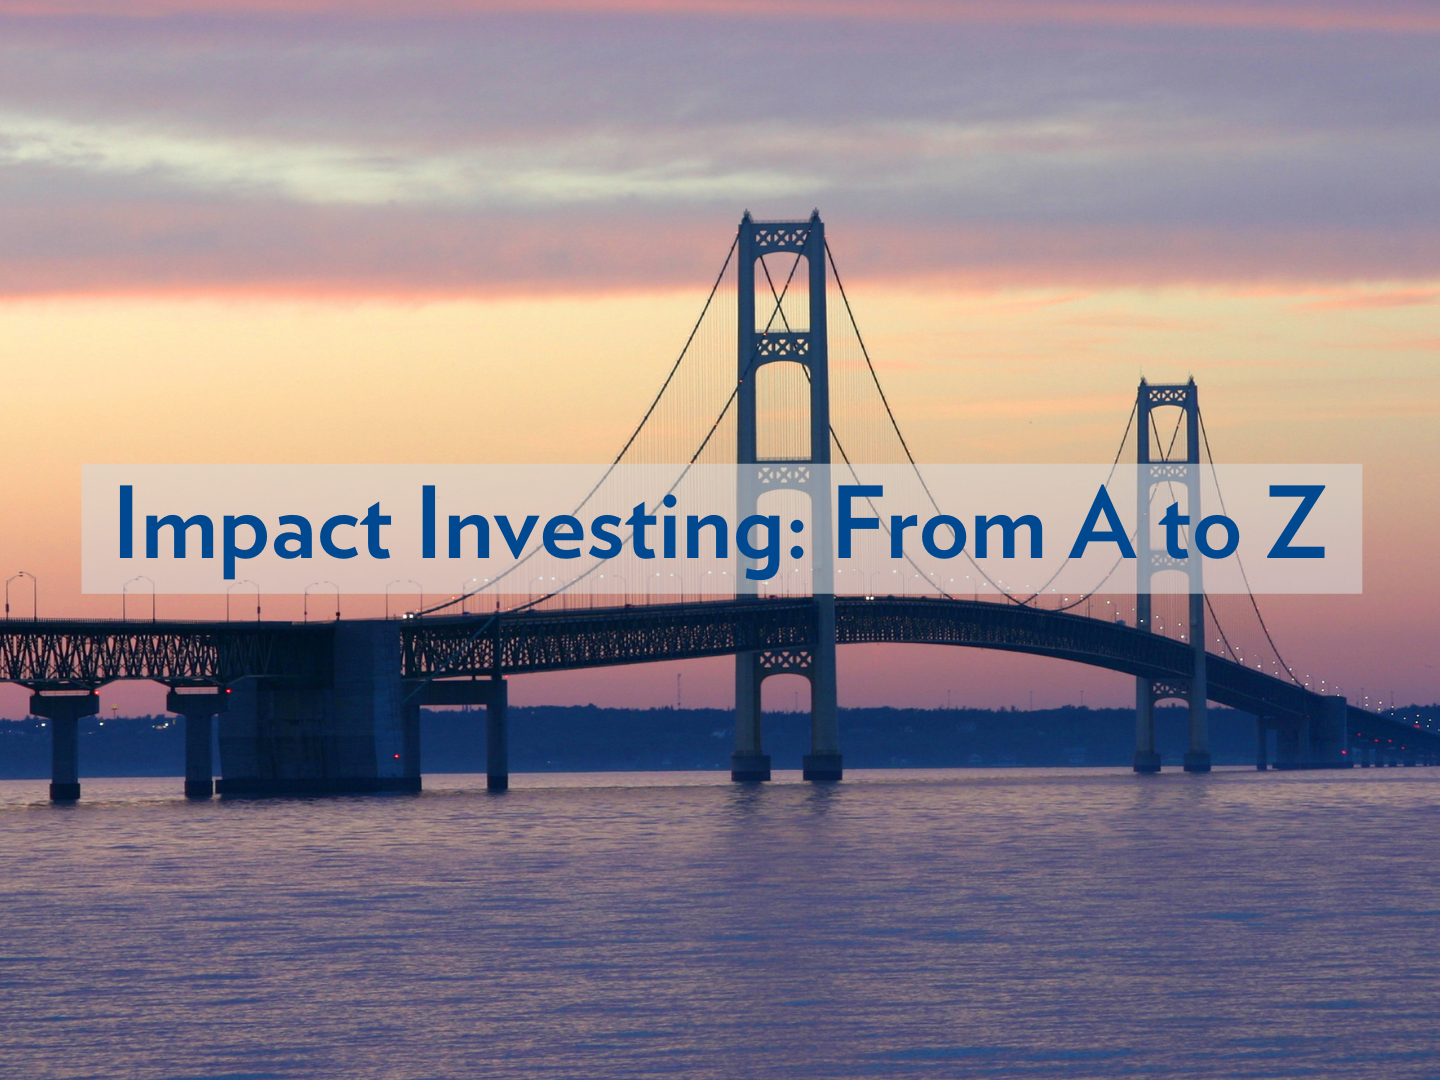 Impacting Investing: From A to Z